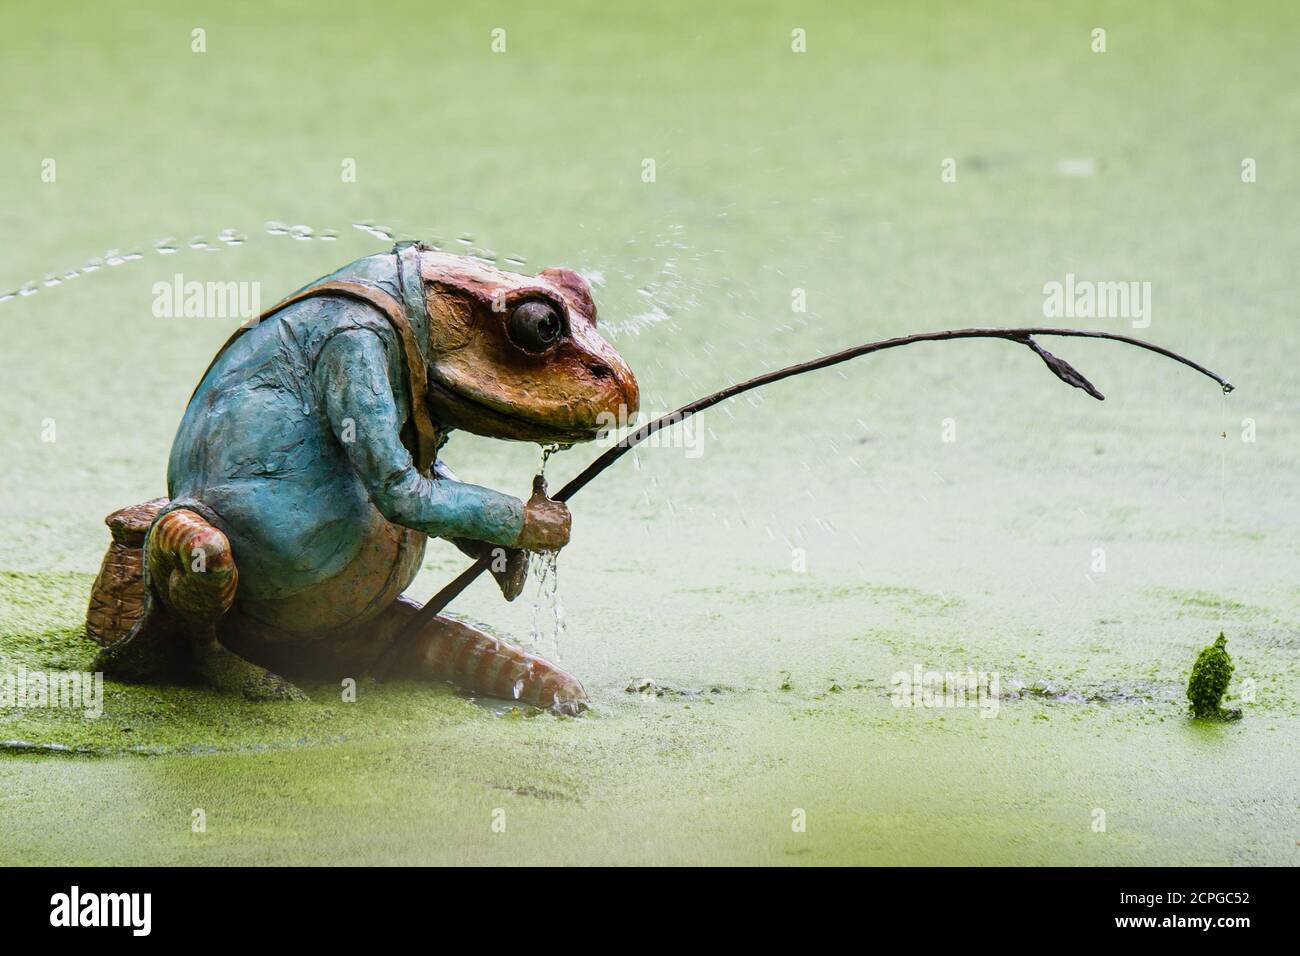 https://c8.alamy.com/comp/2CPGC52/a-small-frog-fishing-with-a-fishing-rod-ornament-in-a-green-lake-2CPGC52.jpg